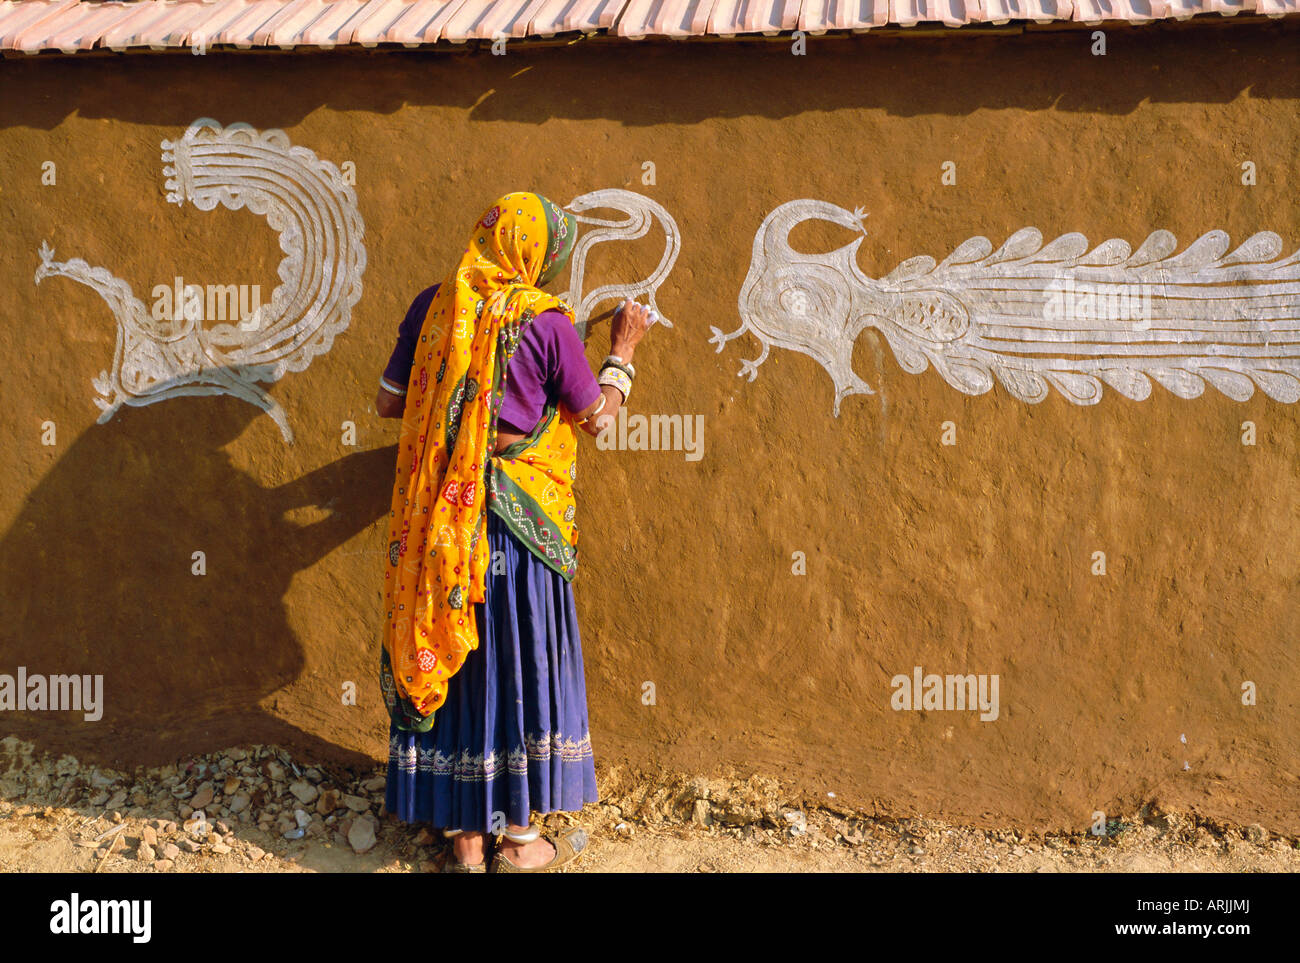 Woman decorating her house with traditional local designs, Tonk region, Rajasthan, India, Asia Stock Photo